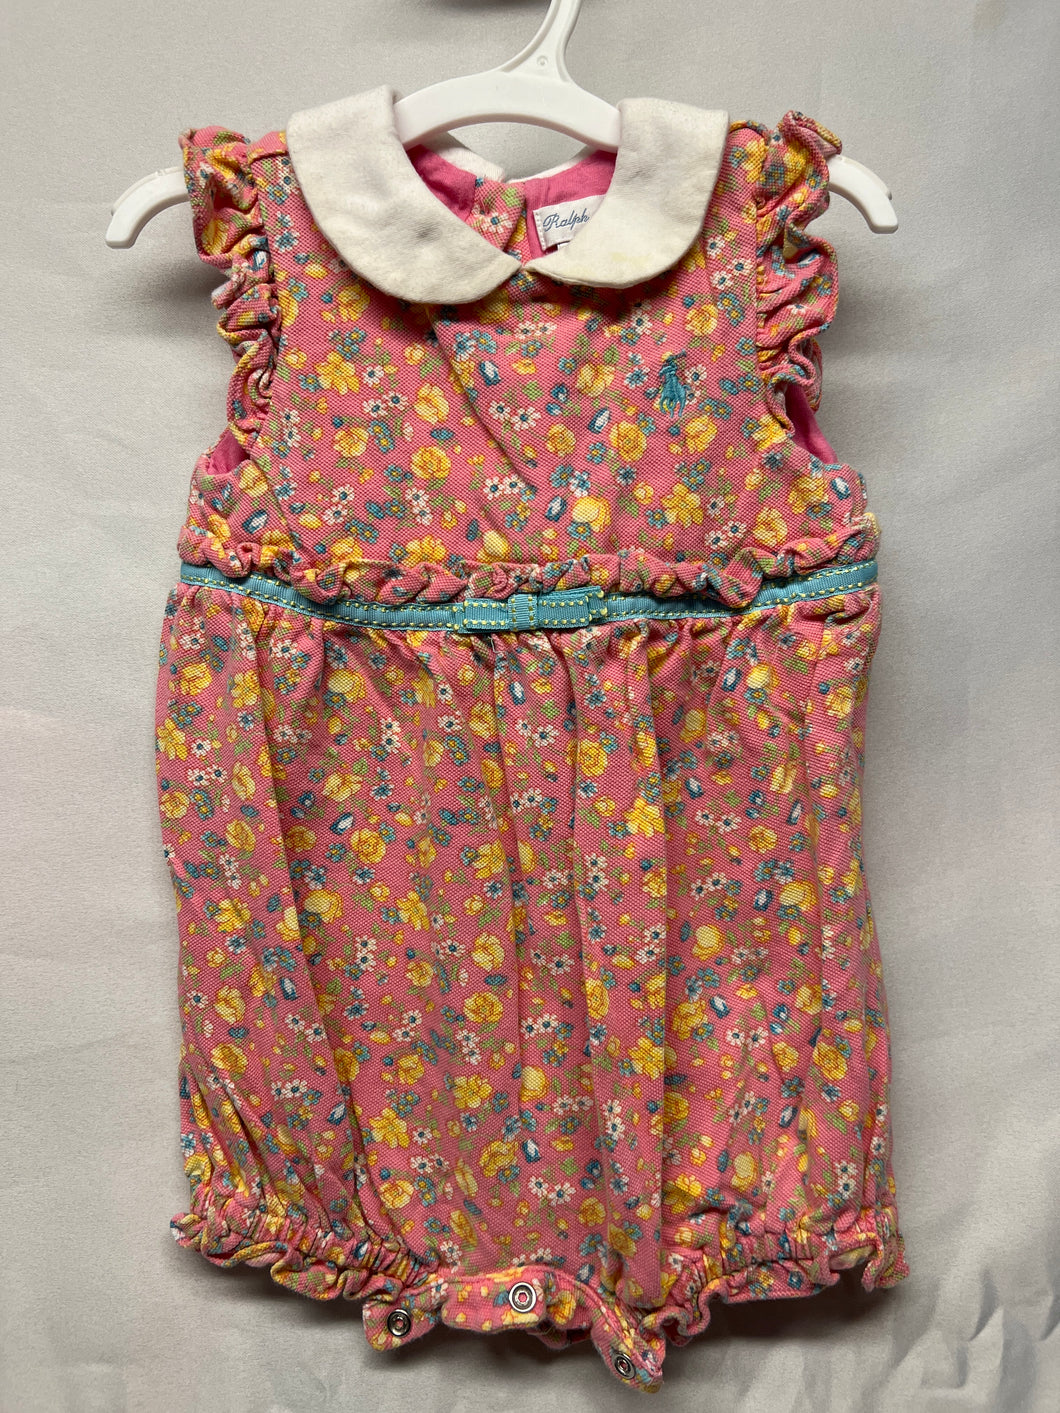 Ralph Lauren romper, white collar, pink with yellow flowers blue ribbon across 9 months